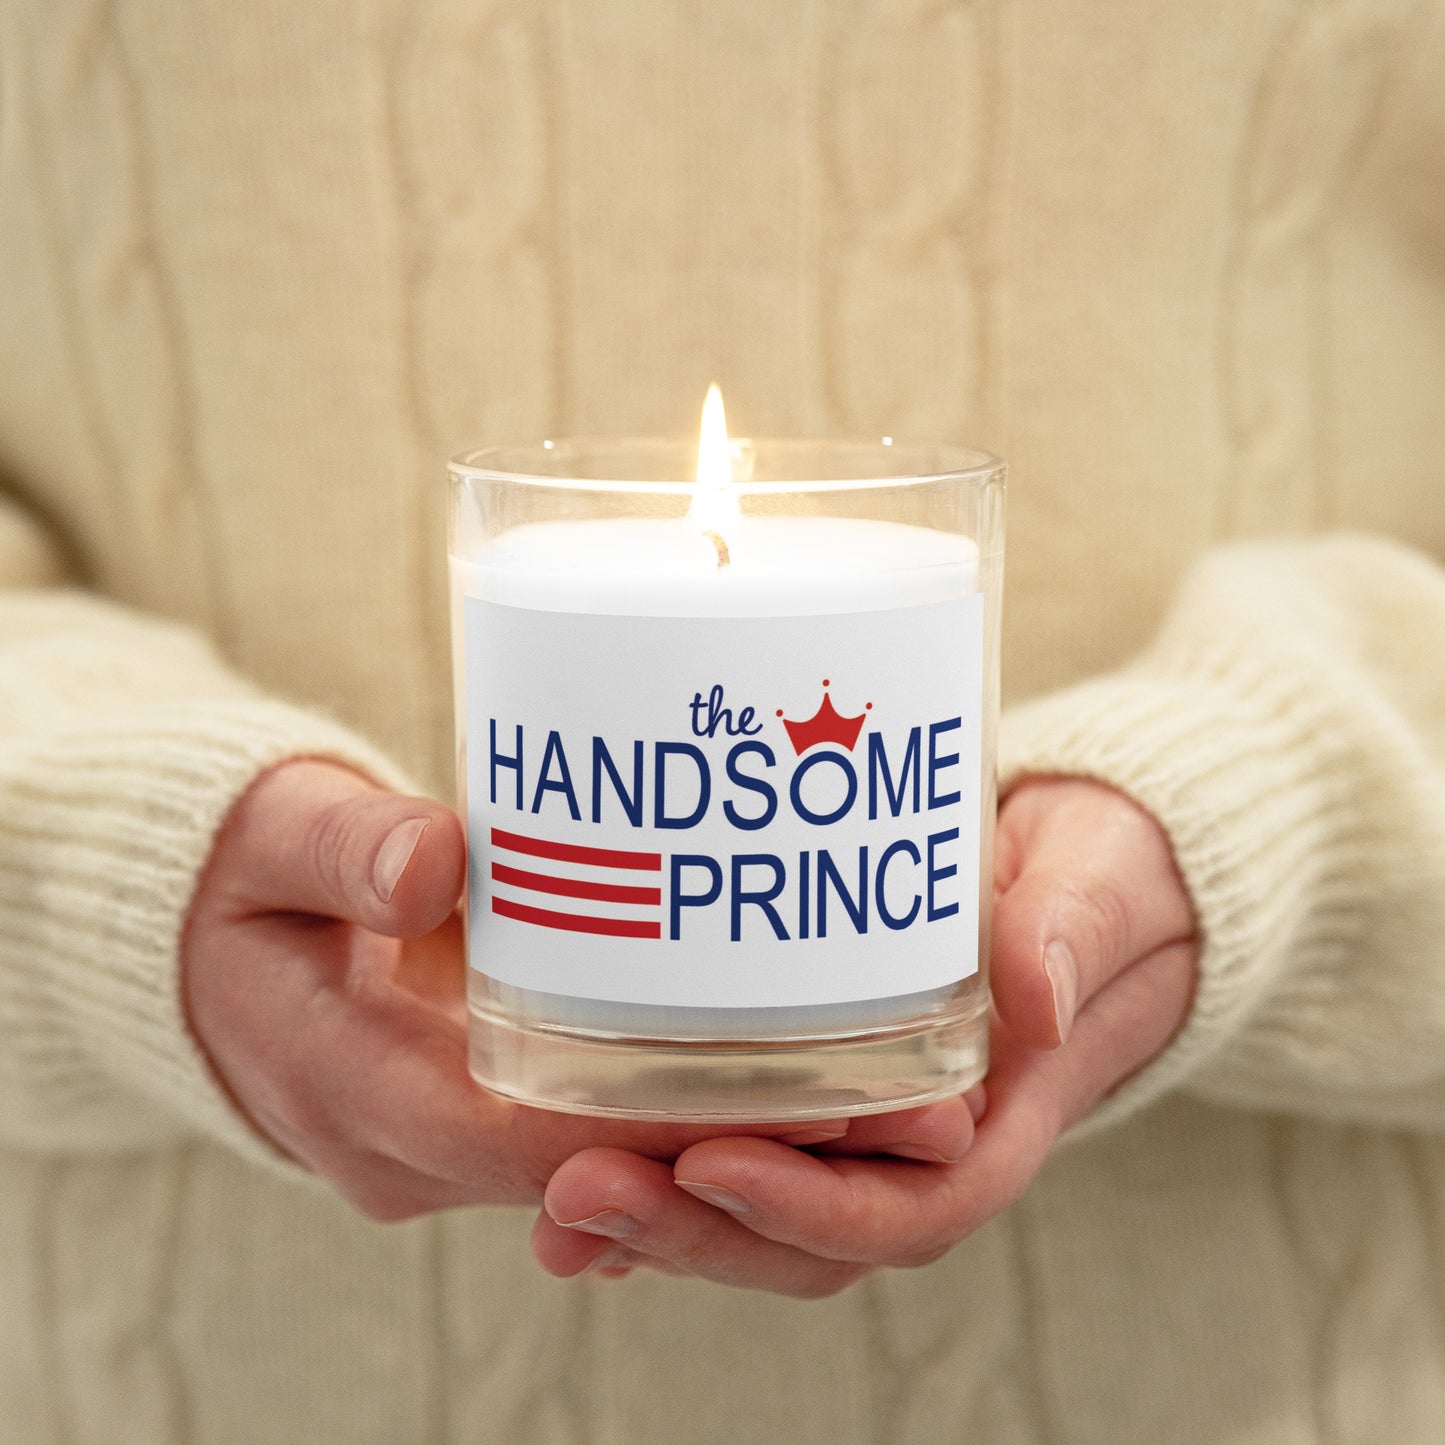 The Handsome Prince Candle